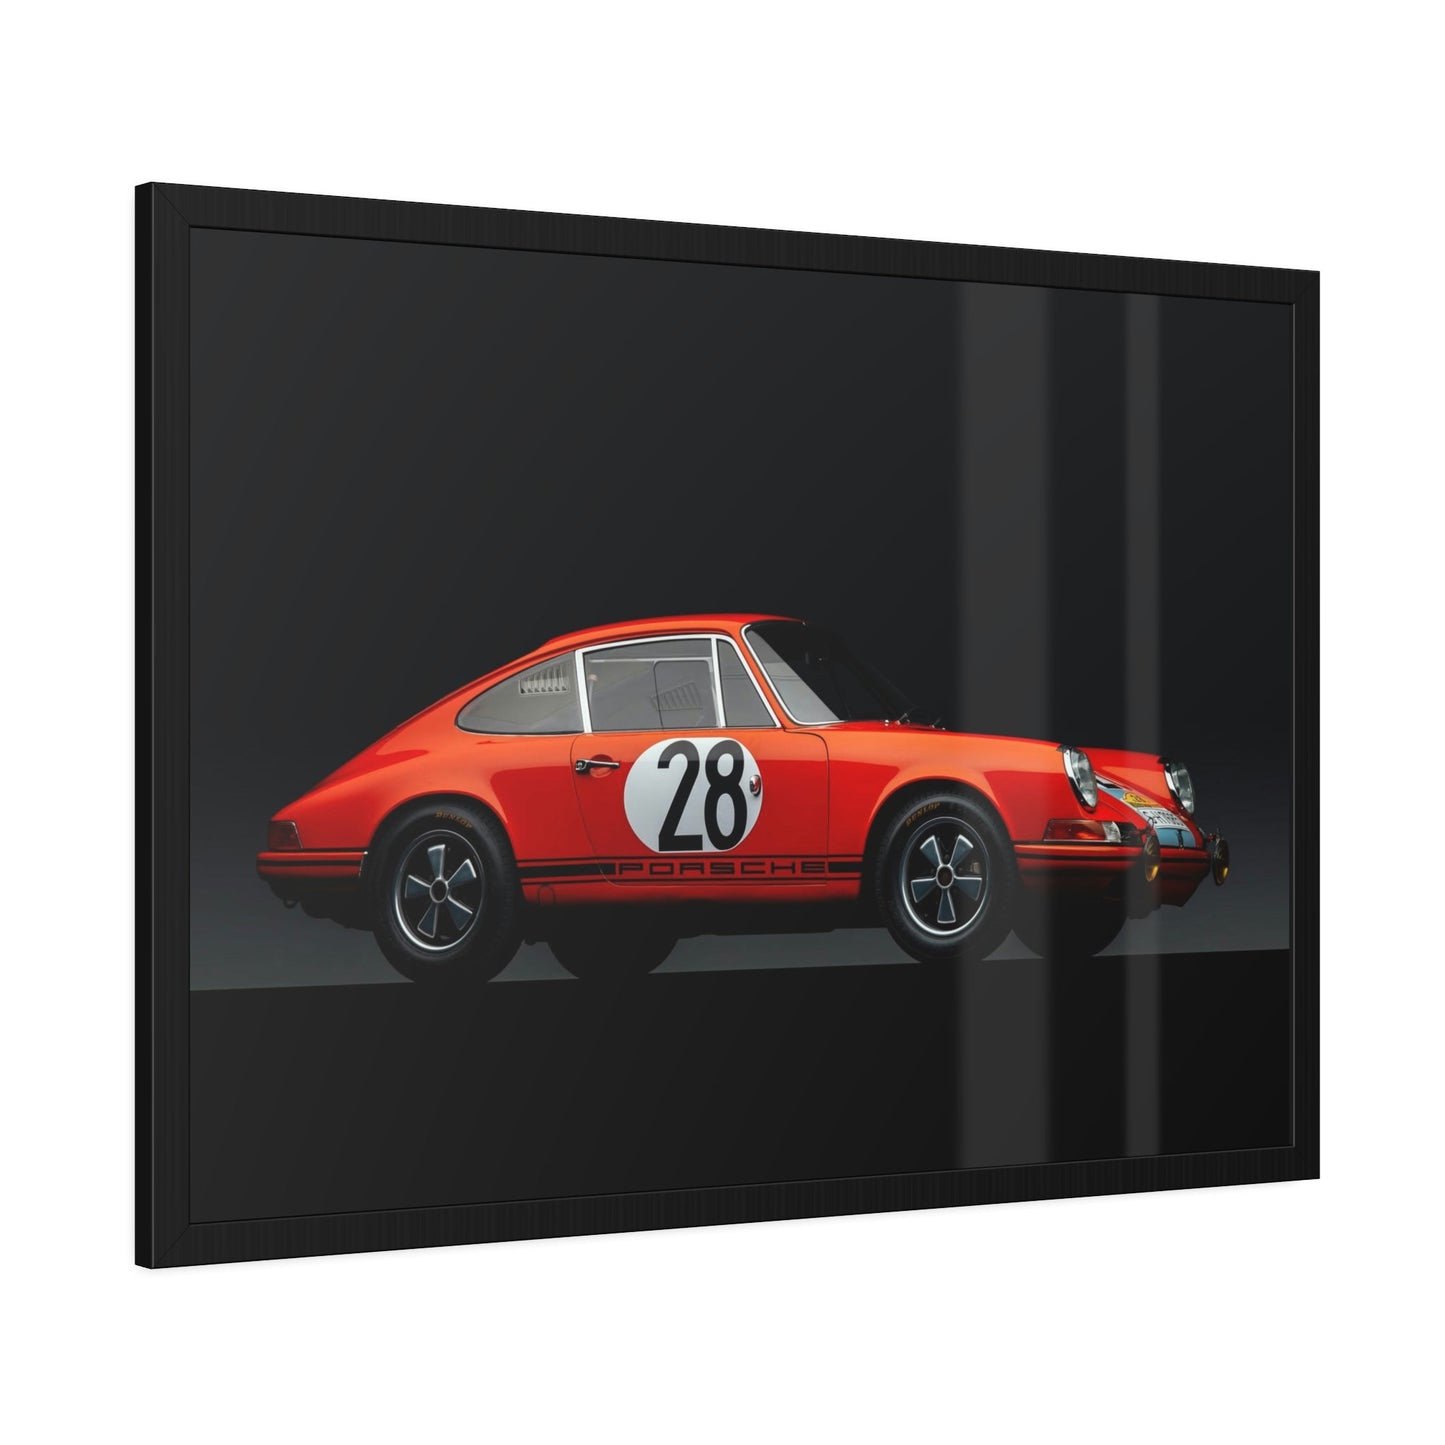 Iconic Porsche: A High-Quality Print on Canvas for Fans of Classic Cars